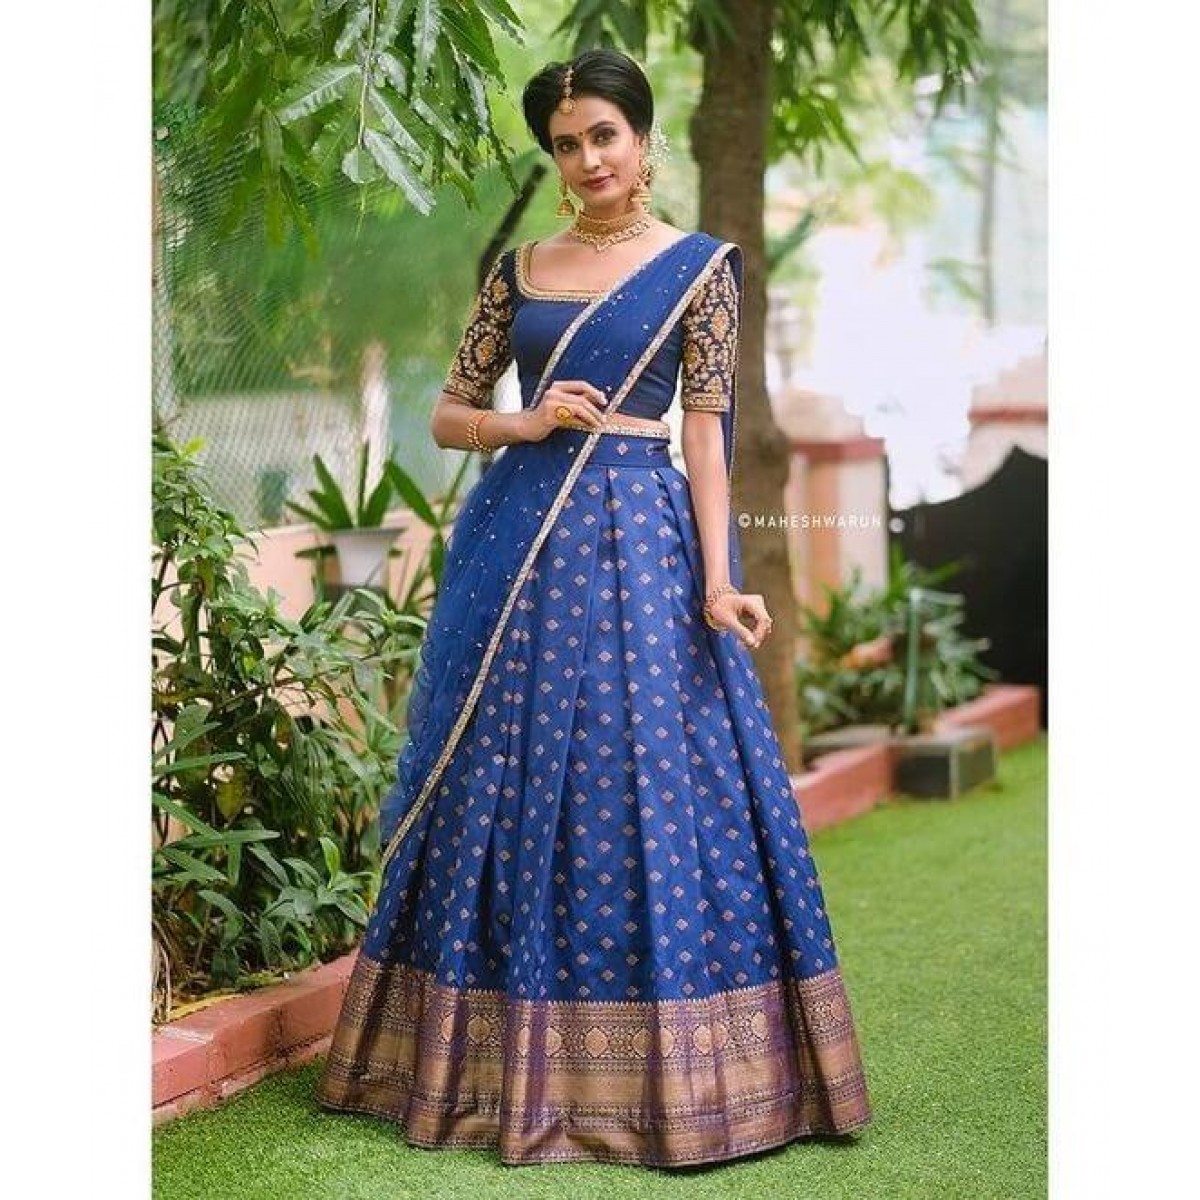 Lehenga Half Saree In South Indian Style In Royal Blue Color